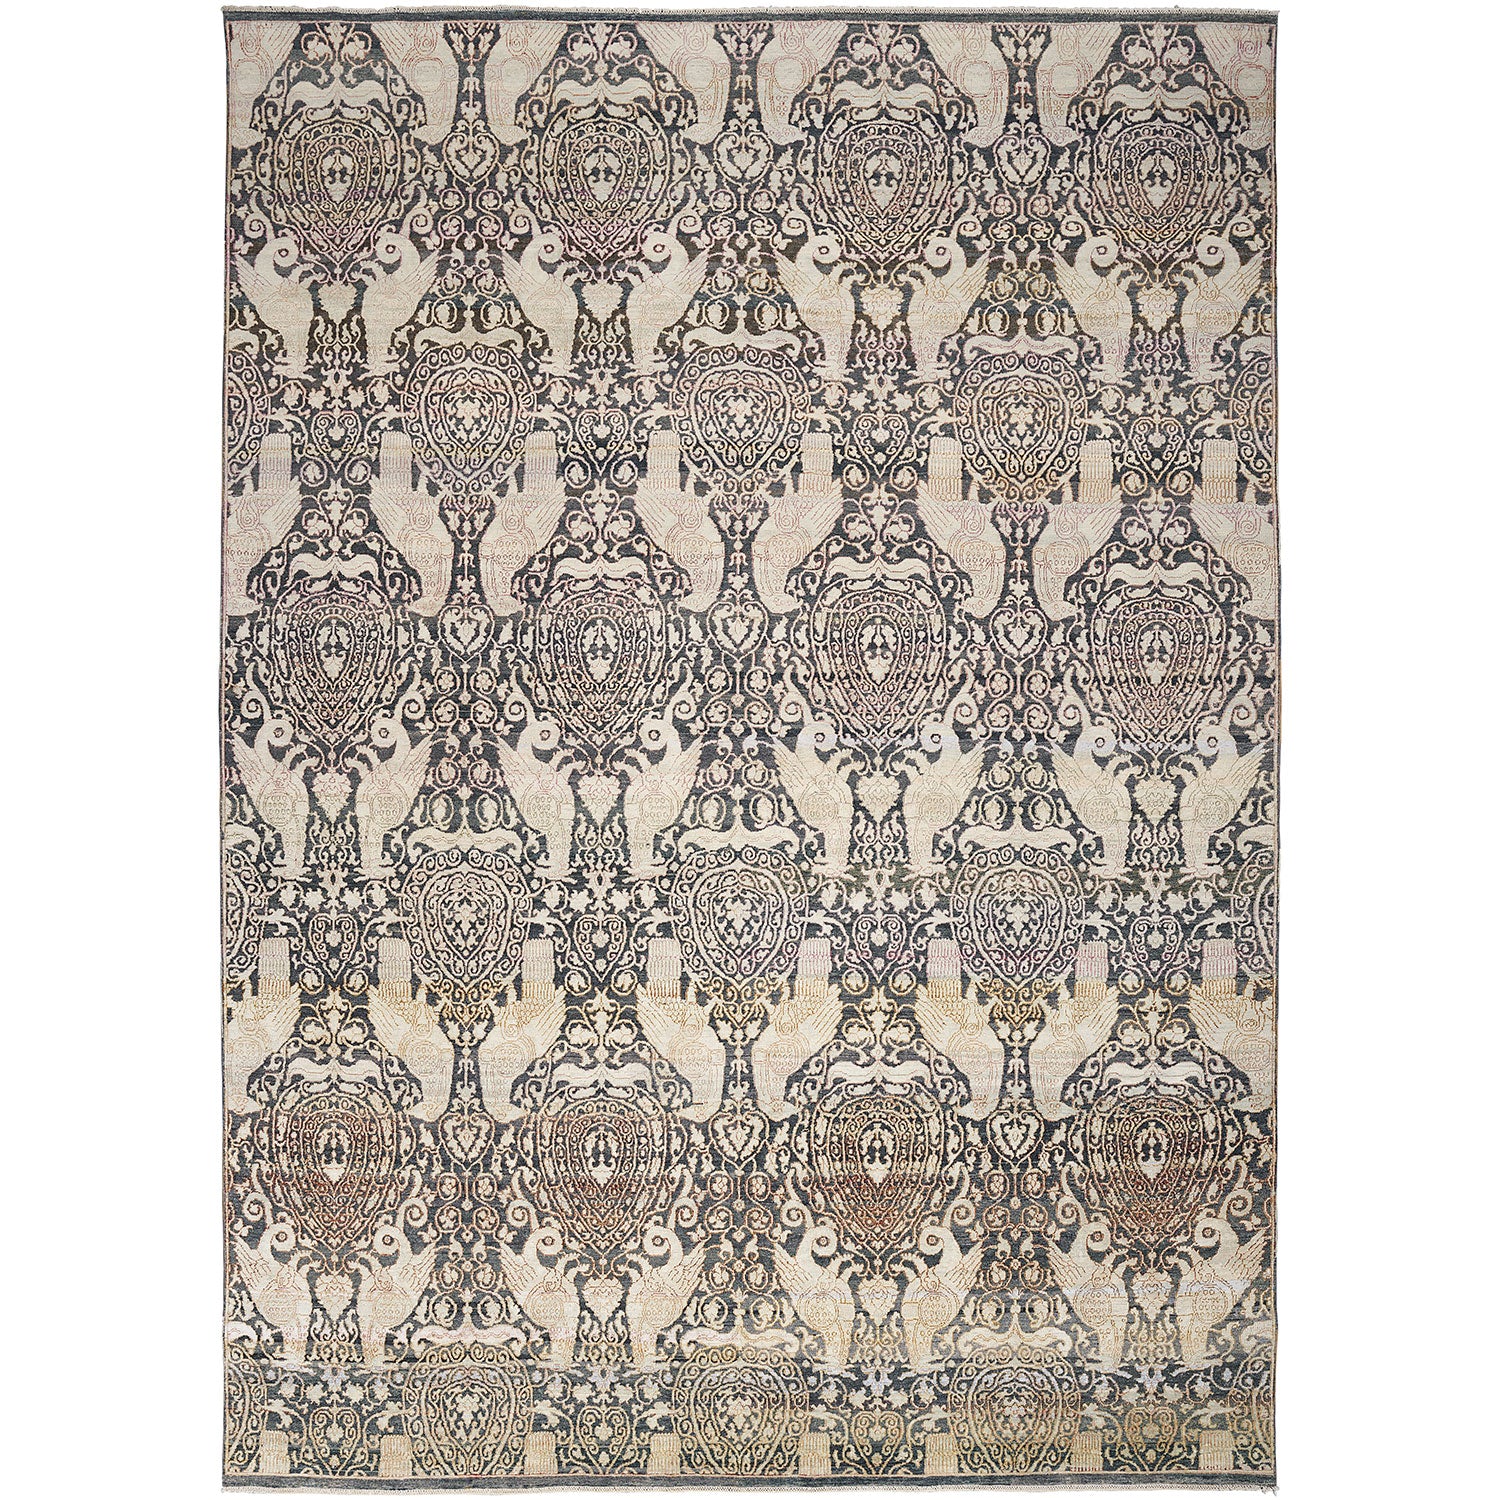 Symmetrical and intricate patterned rectangular area rug in muted colors.